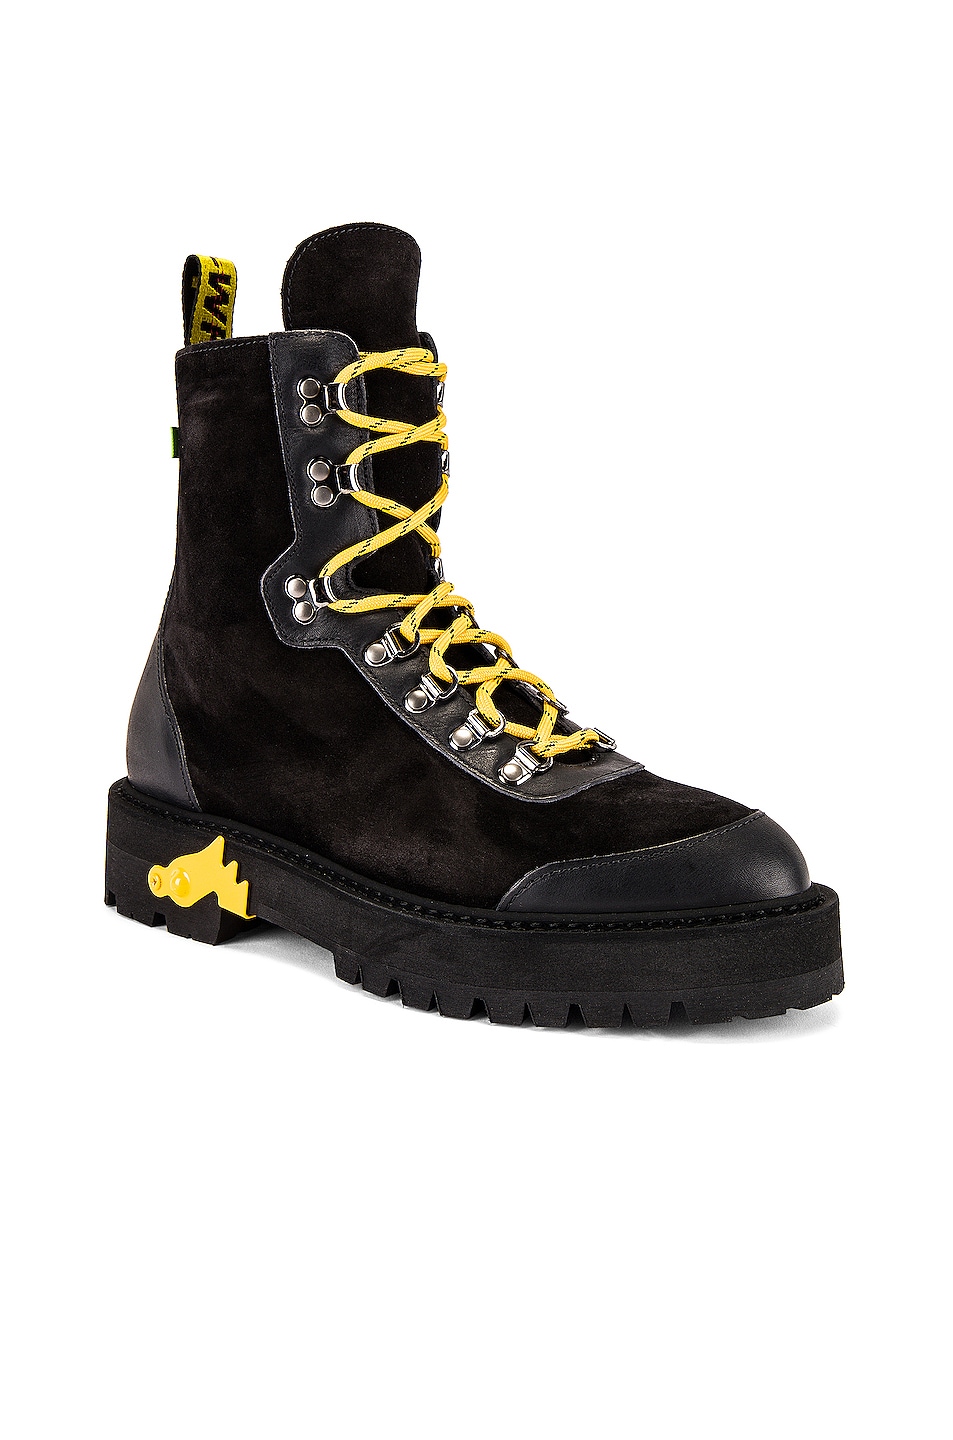 OFF-WHITE Hiking Boot in Black | FWRD